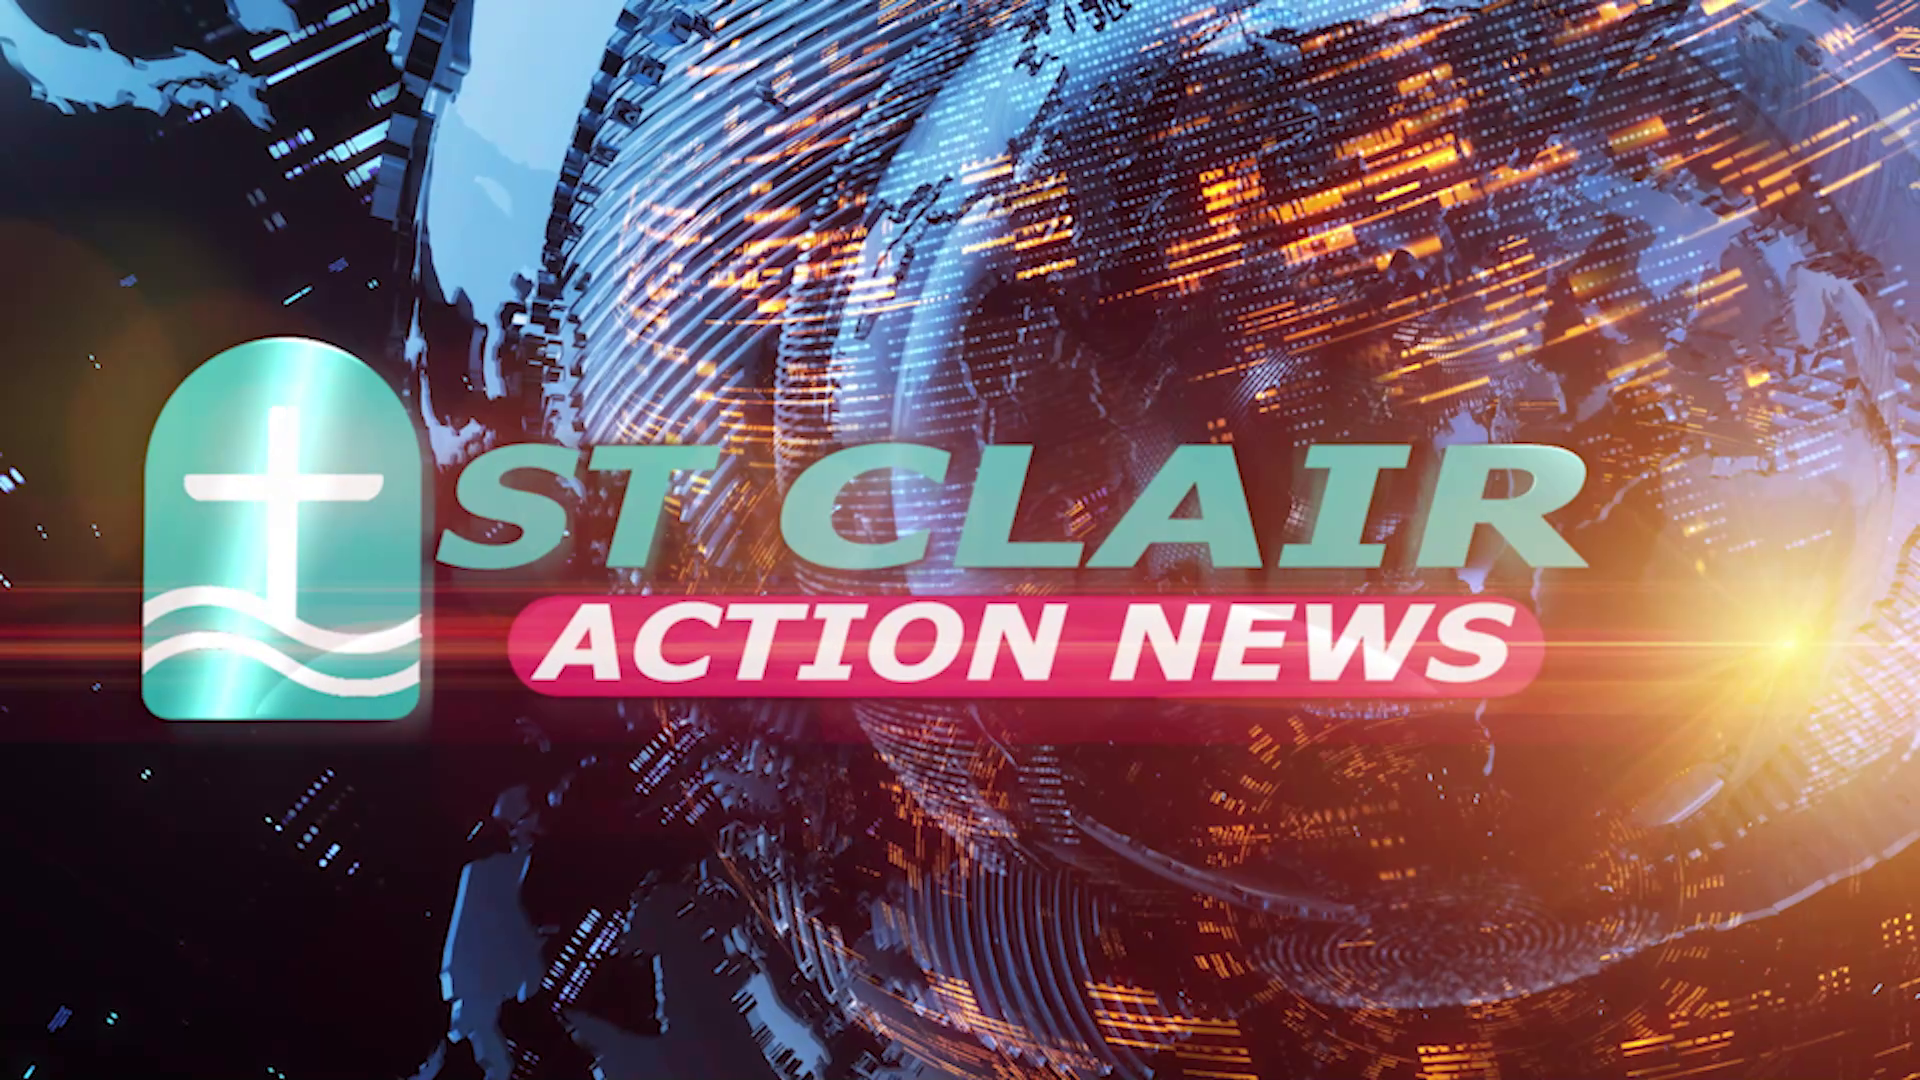 St. Clair Action News Releases Episode 7; Up-To-Date Coverage of St. Clair Catholic’s New School Construction Projects in Sarnia and Chatham